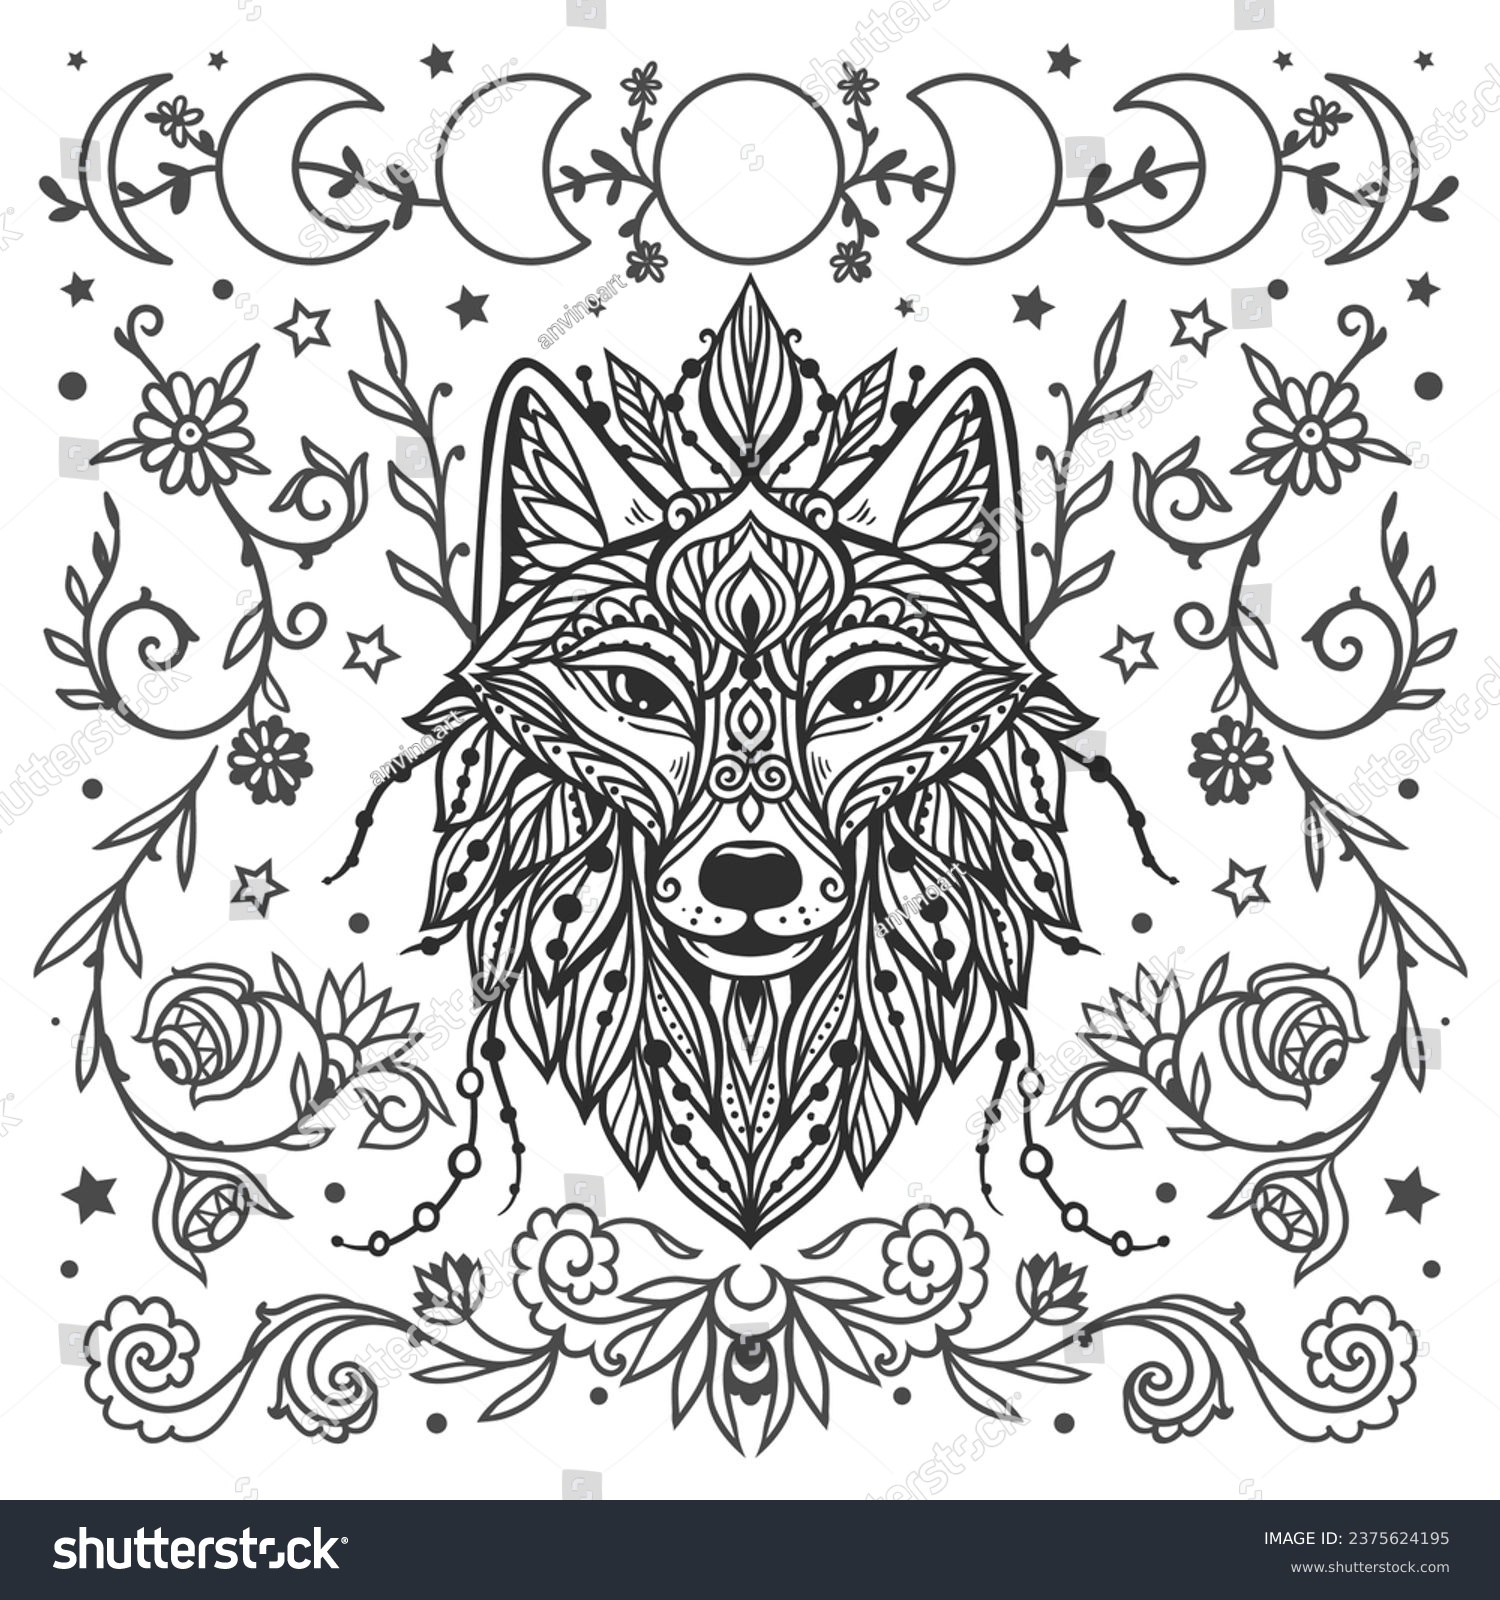 SVG of Wolf mandala. Animal Vector illustration. Adult or kids coloring book page in Zen boho style. Antistress Peaceful drawing. Black and white svg